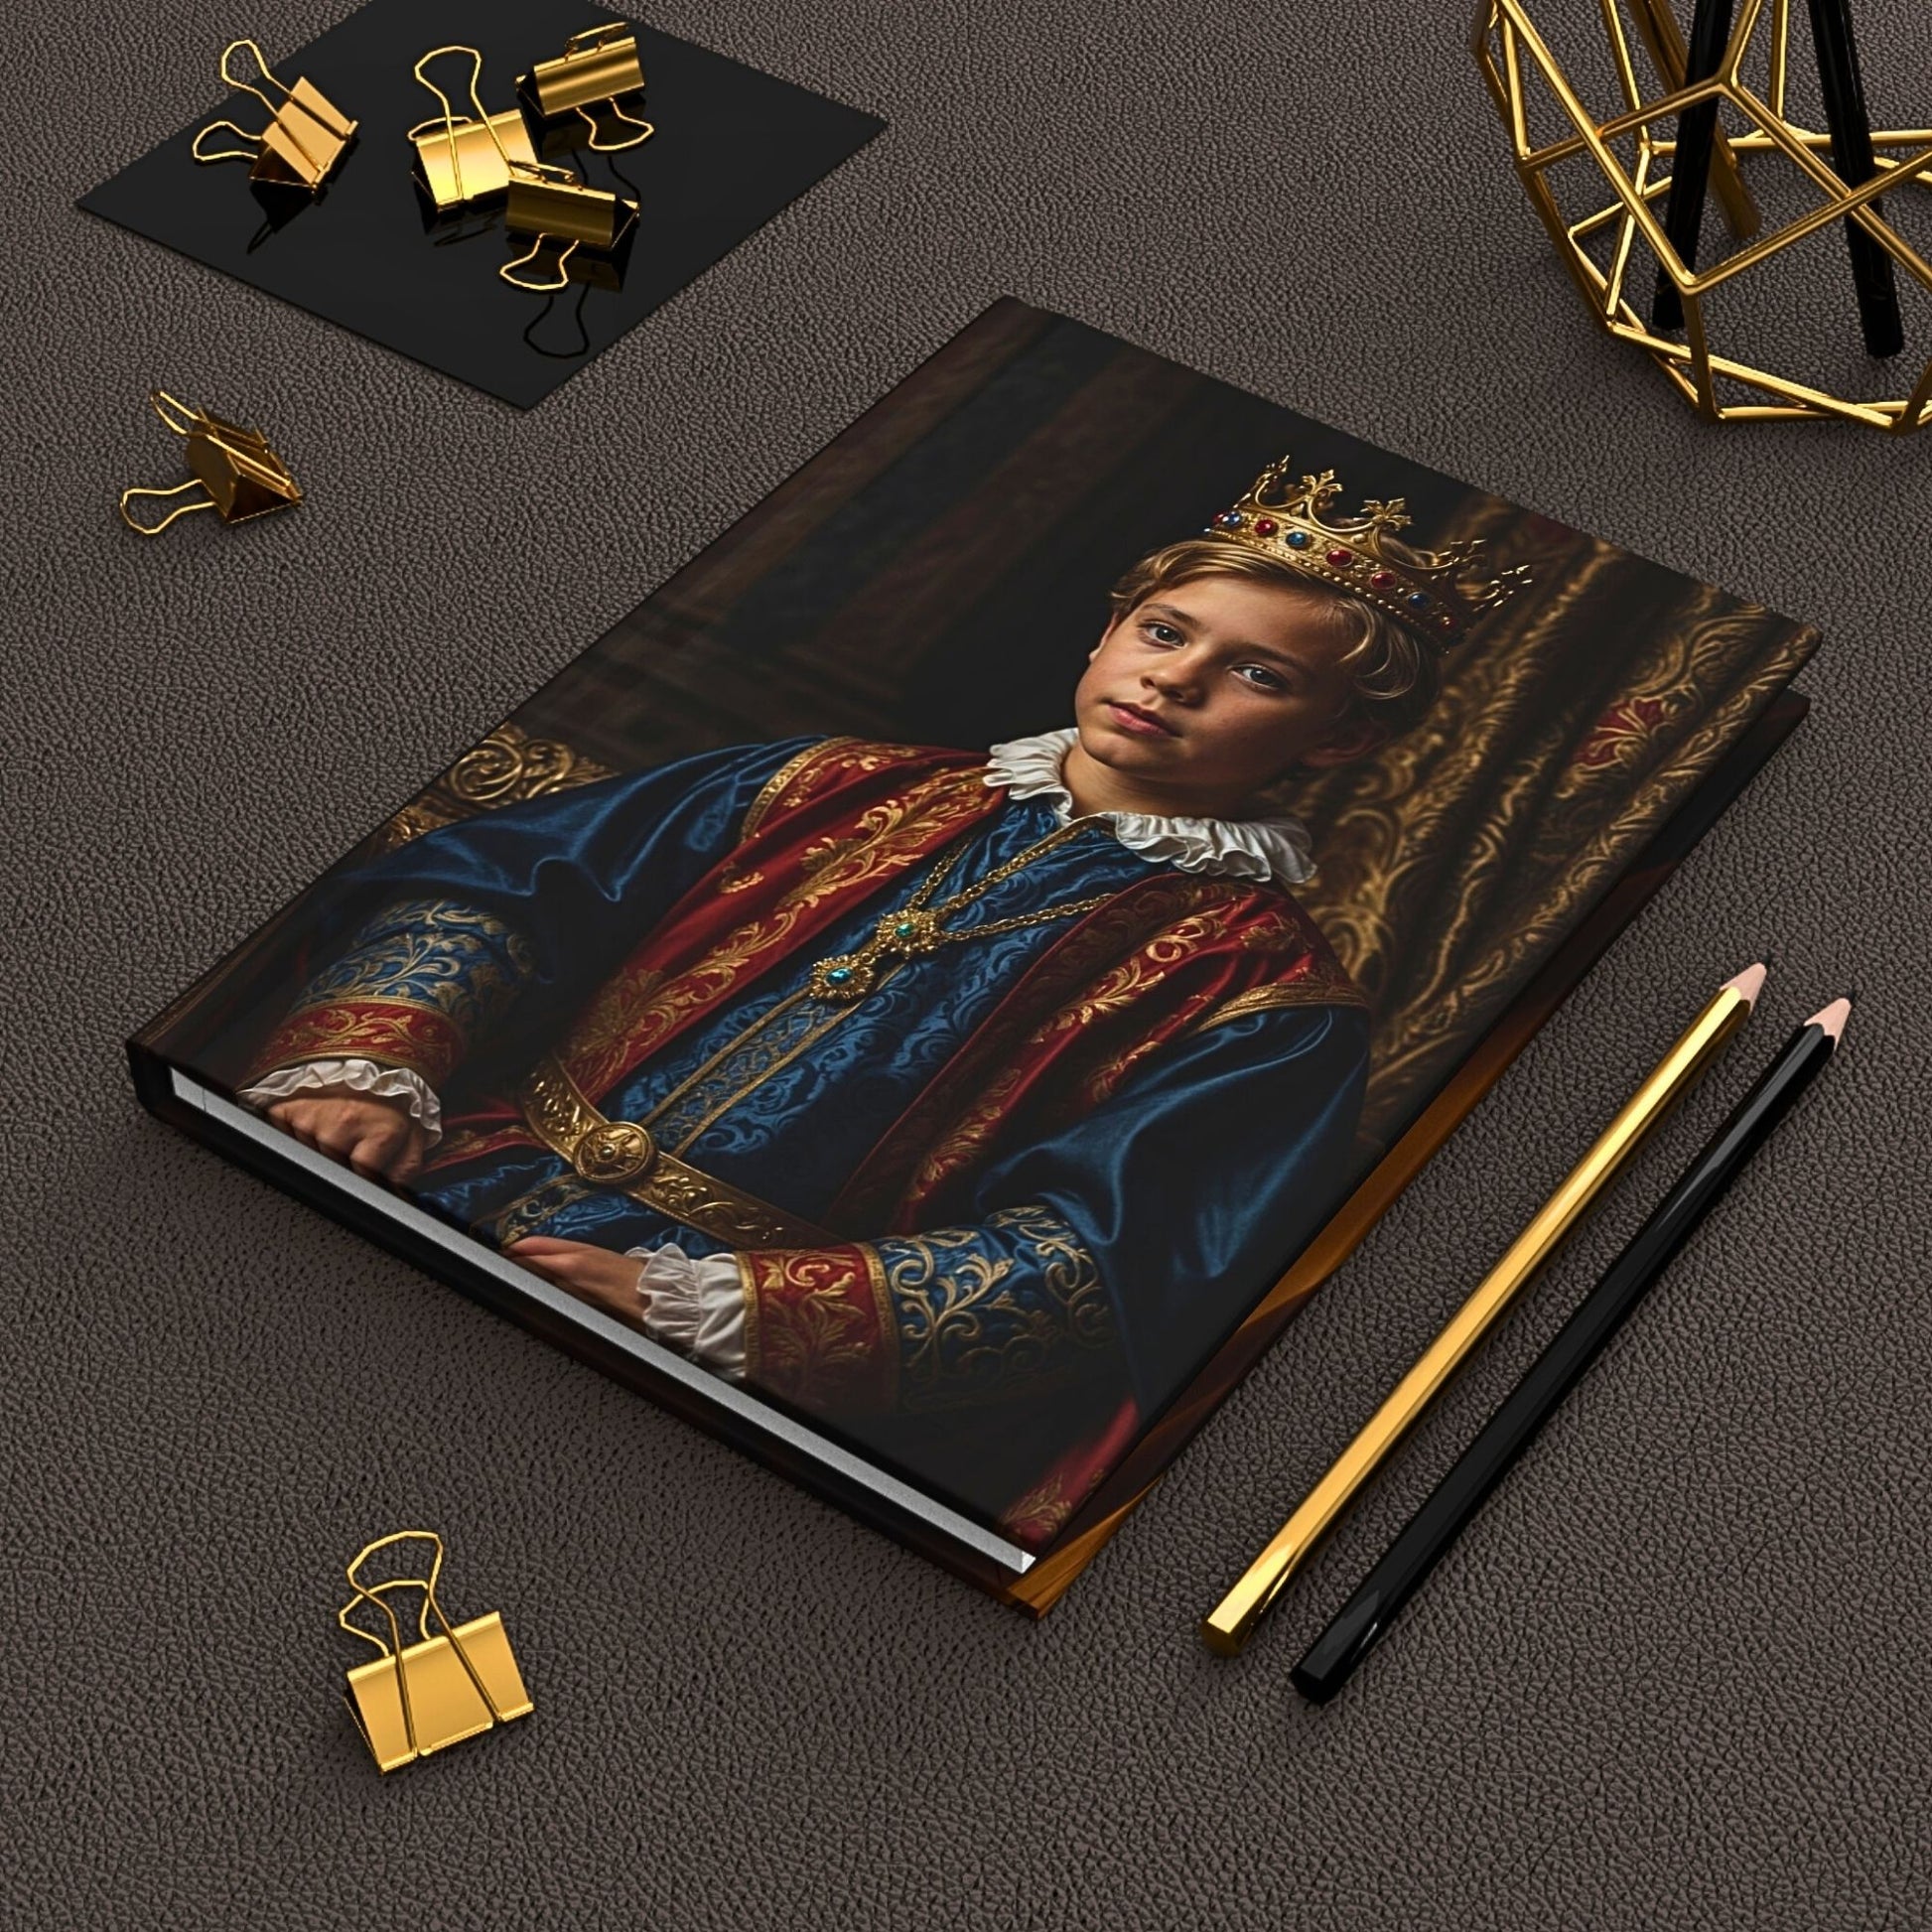 Elevate cherished memories with our Custom Kids Royal Journal. Crafted from your child’s photo, this Renaissance-inspired masterpiece makes a perfect birthday or parental gift. Capture the essence of royalty with a personalized touch for mum and dad.